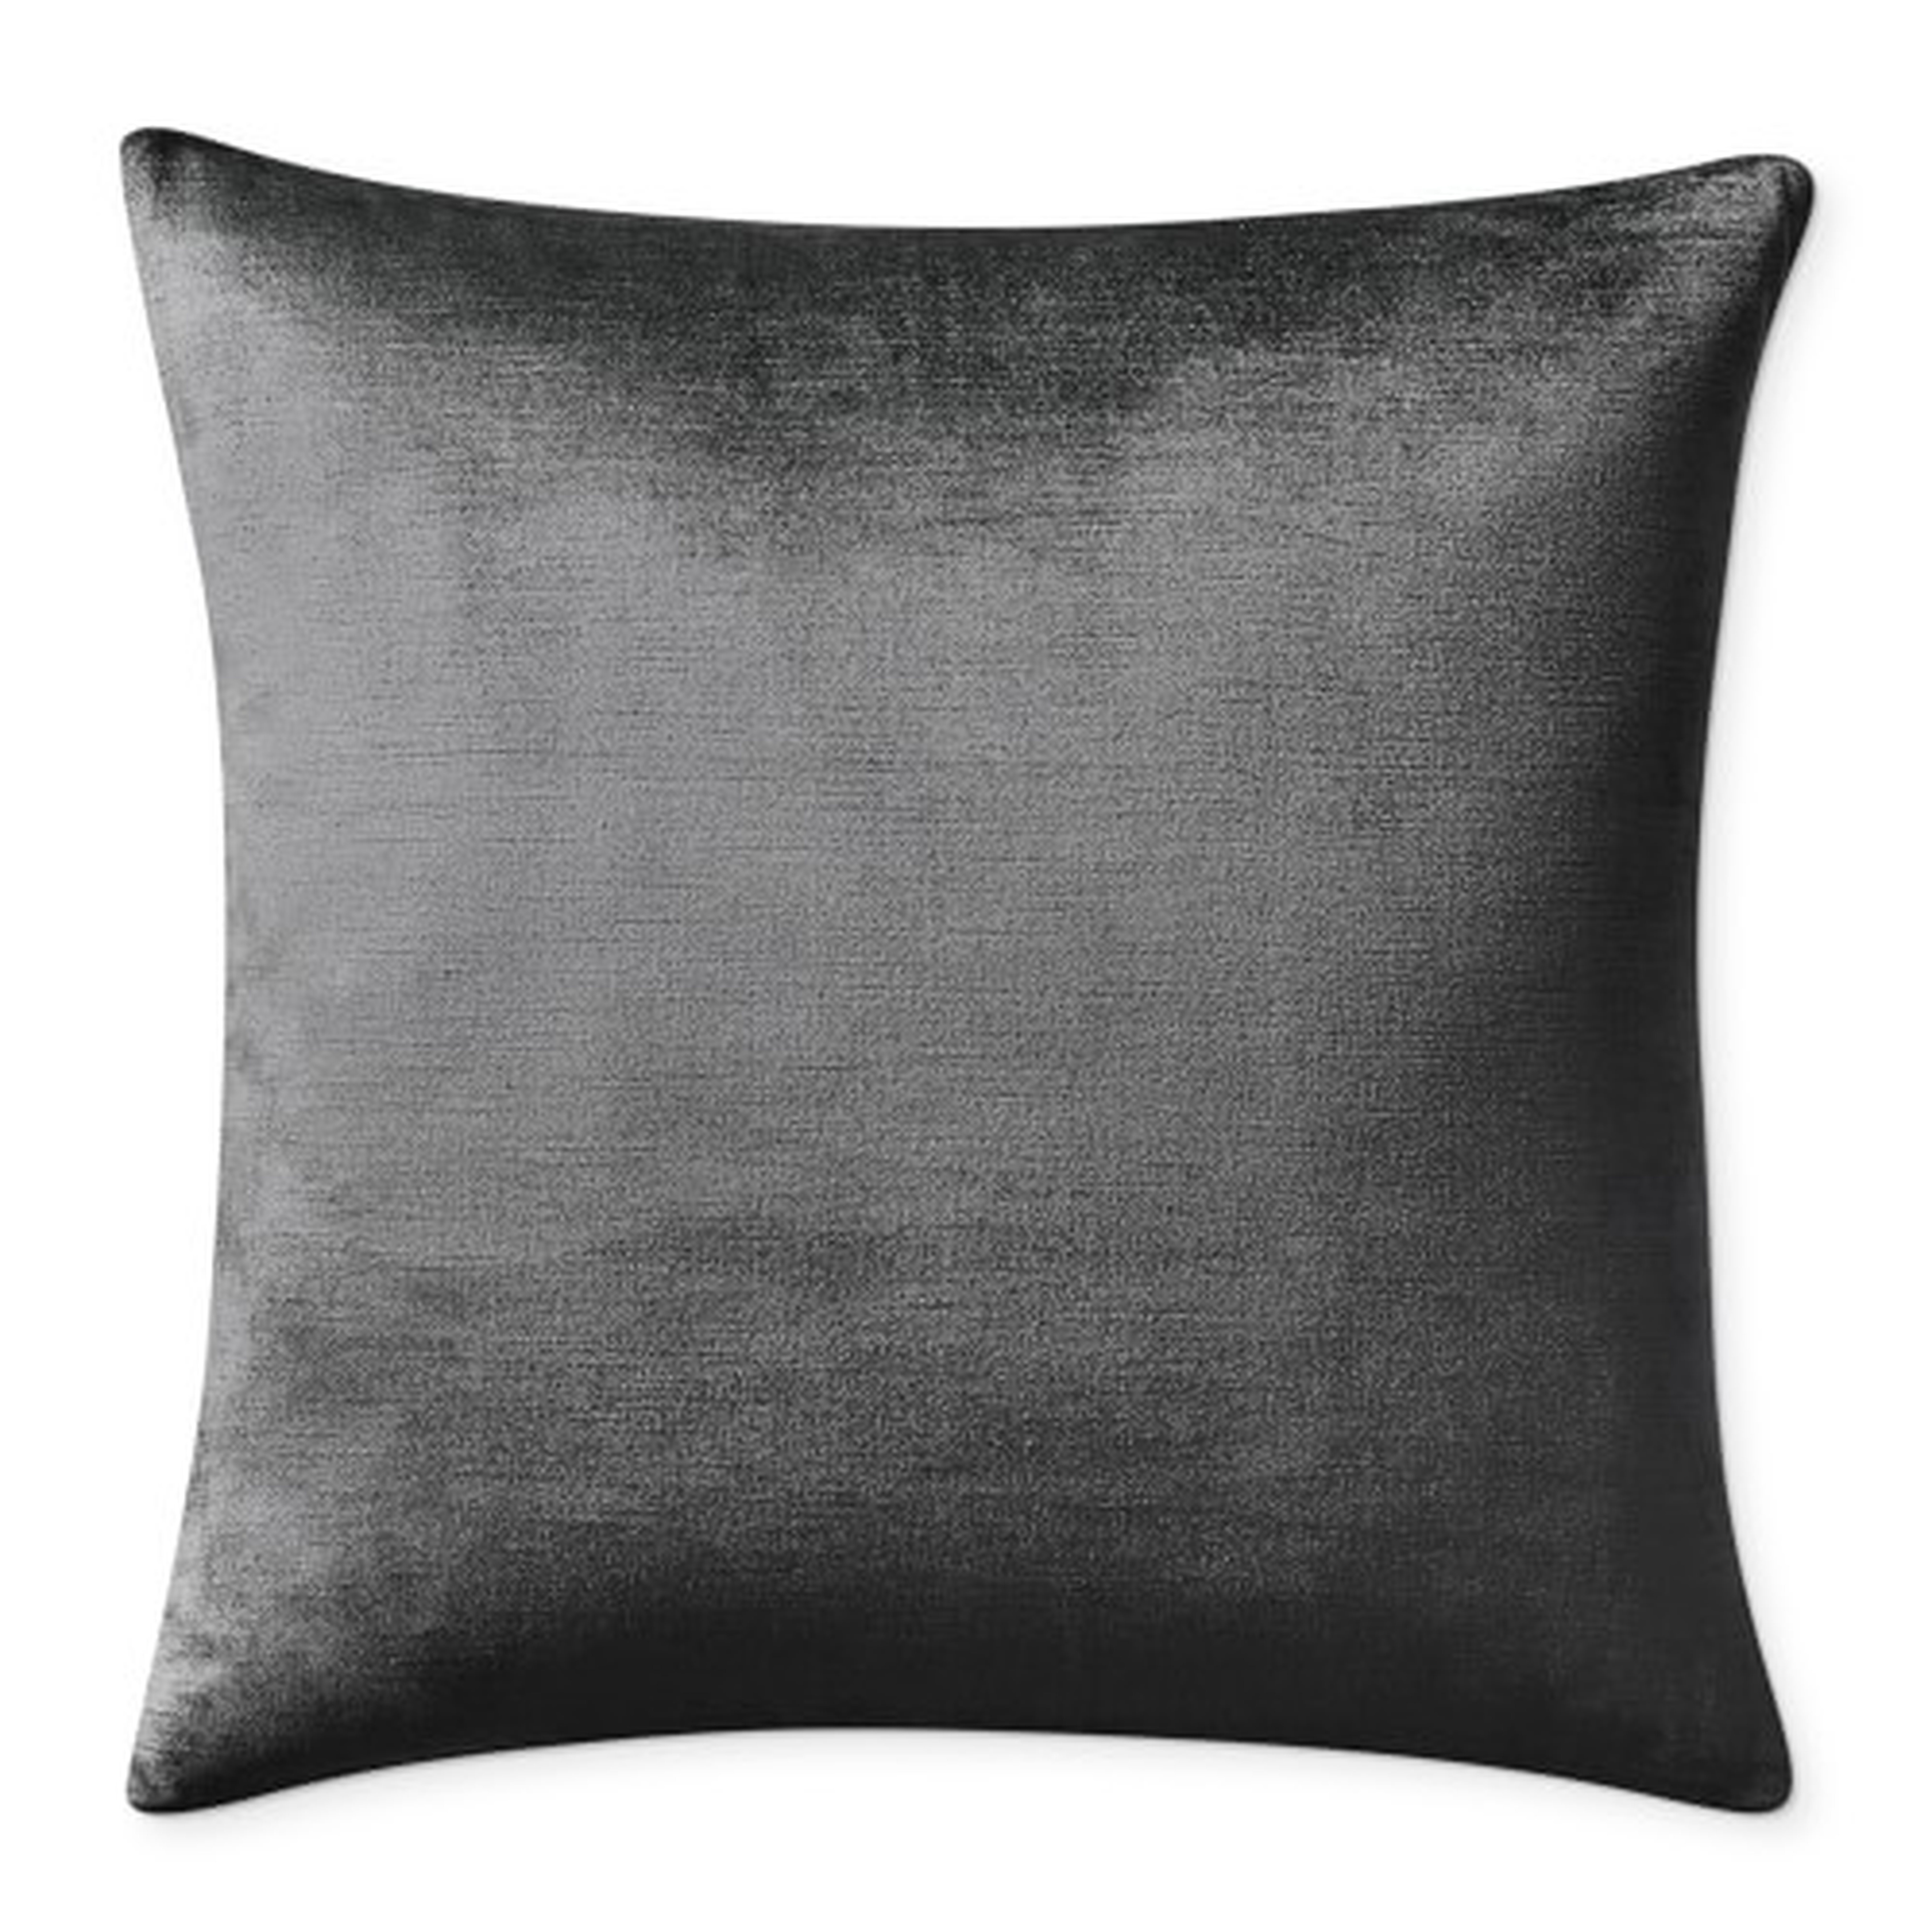 Solid Velvet Pillow Cover, 22" x 22", Charcoal - Williams Sonoma